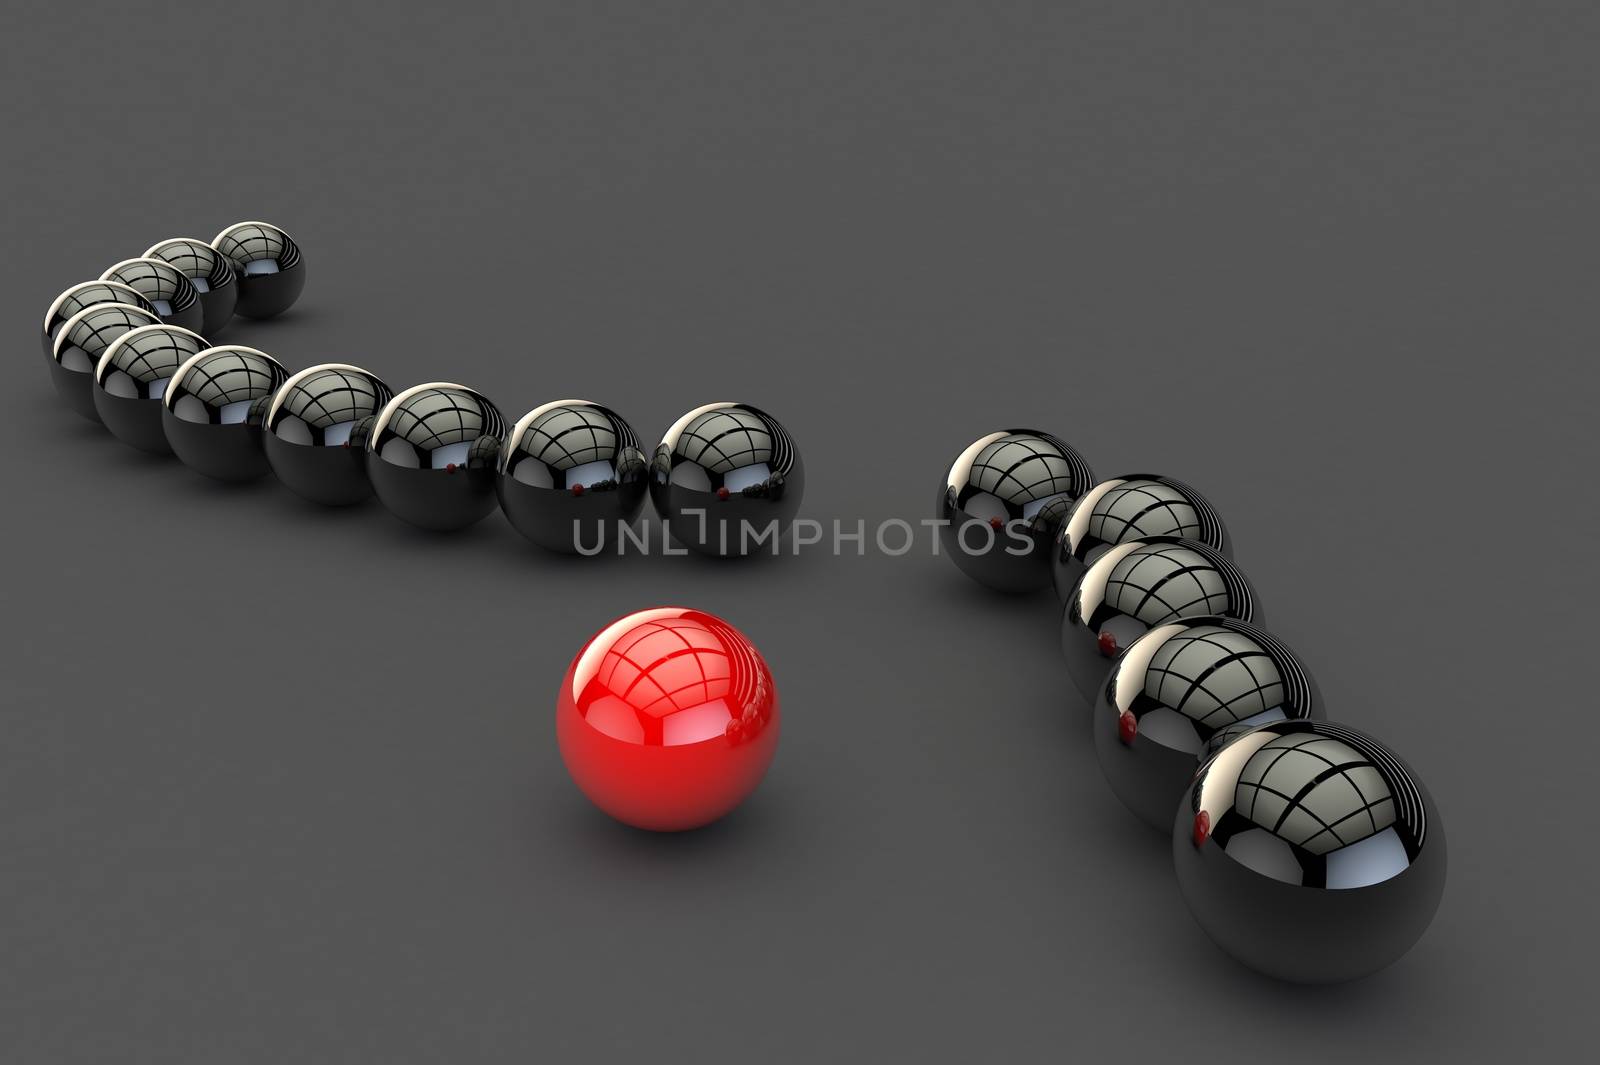 Broken chain of black 3D balls with a reflective coating and a red ball standing separately, standing on a gray surface